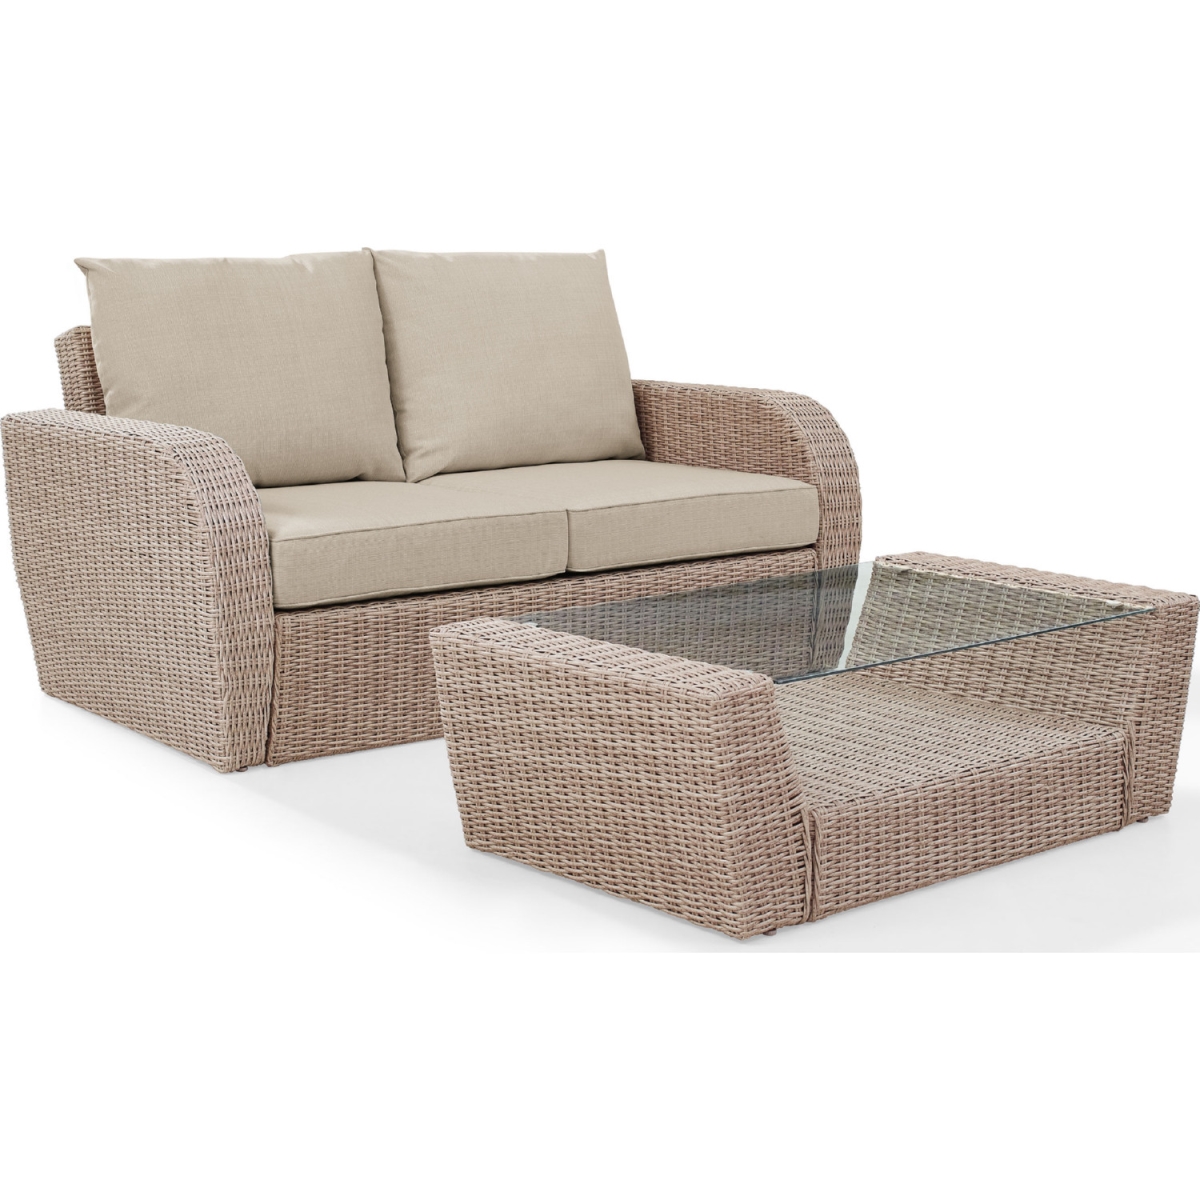 Ko70133wh-ol 2 Piece St. Augustine Outdoor Wicker Seating Set With Oatmeal Cushion - Loveseat, Coffee Table